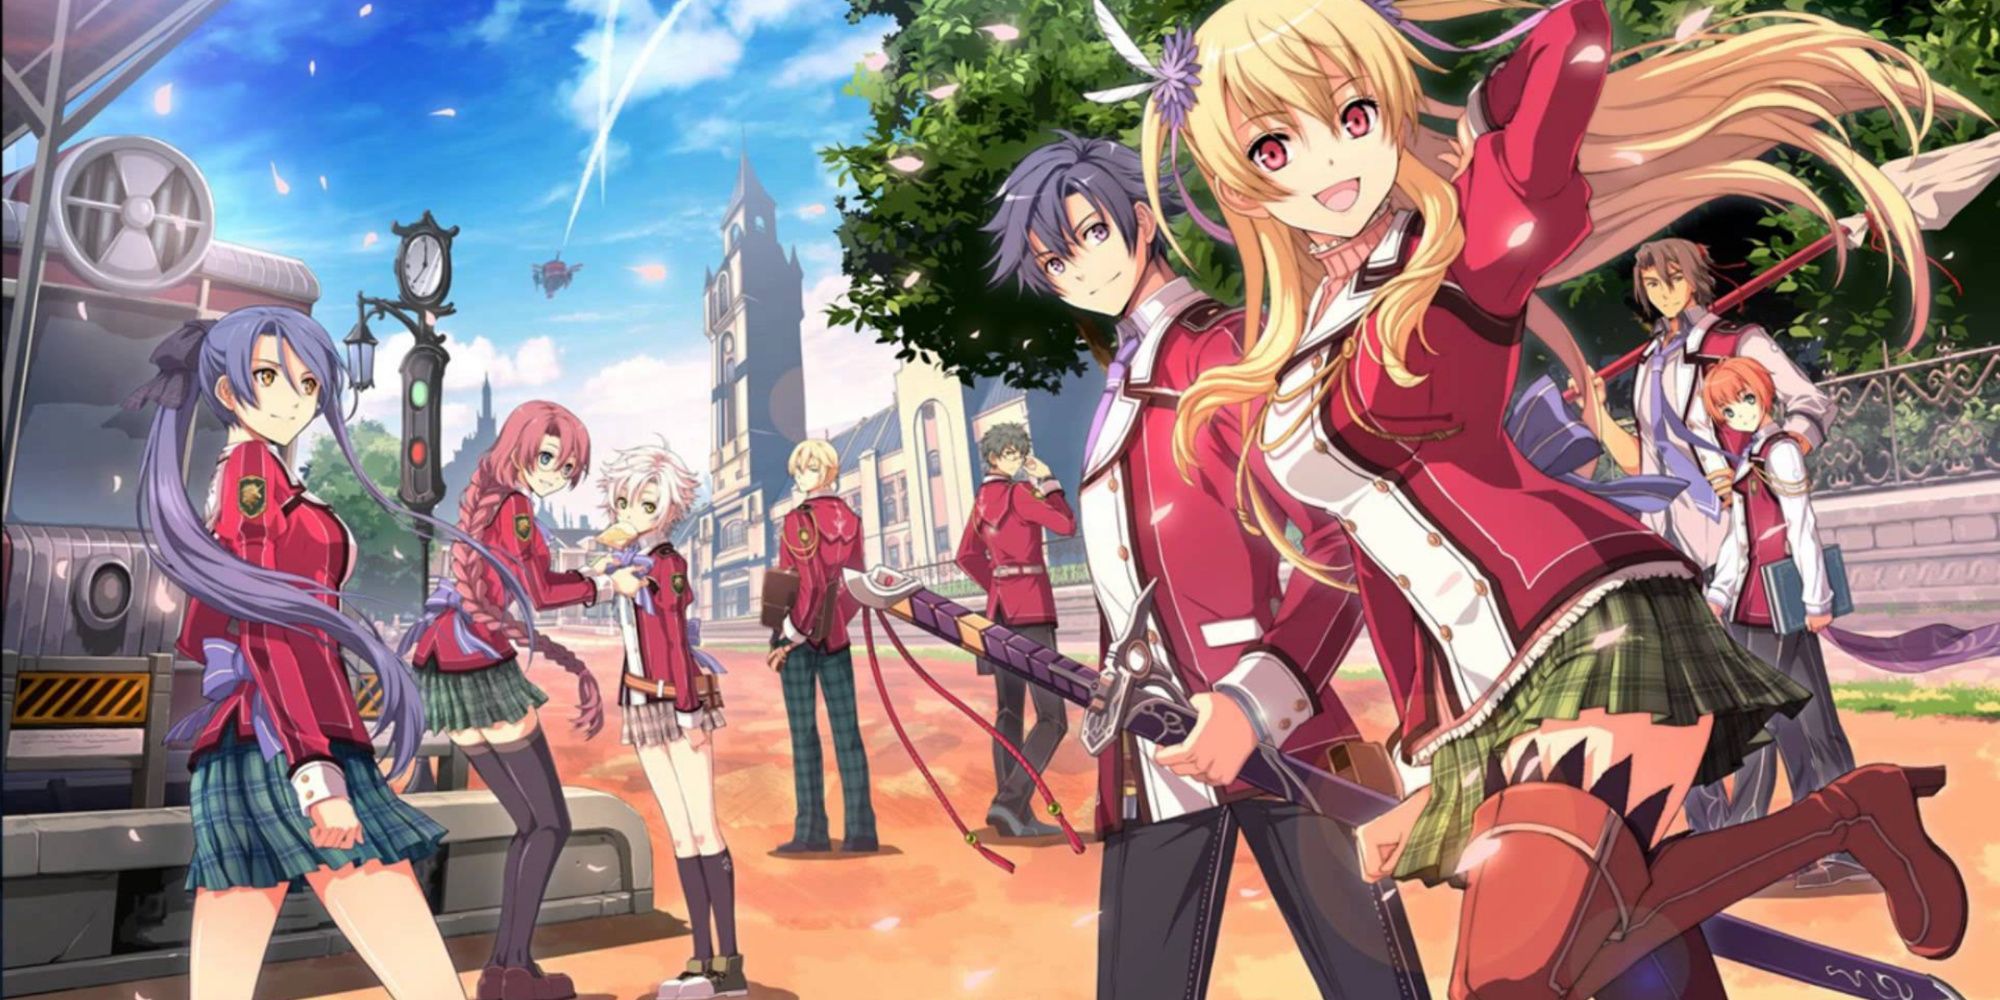 Promo art featuring characters in Trails of Cold Steel